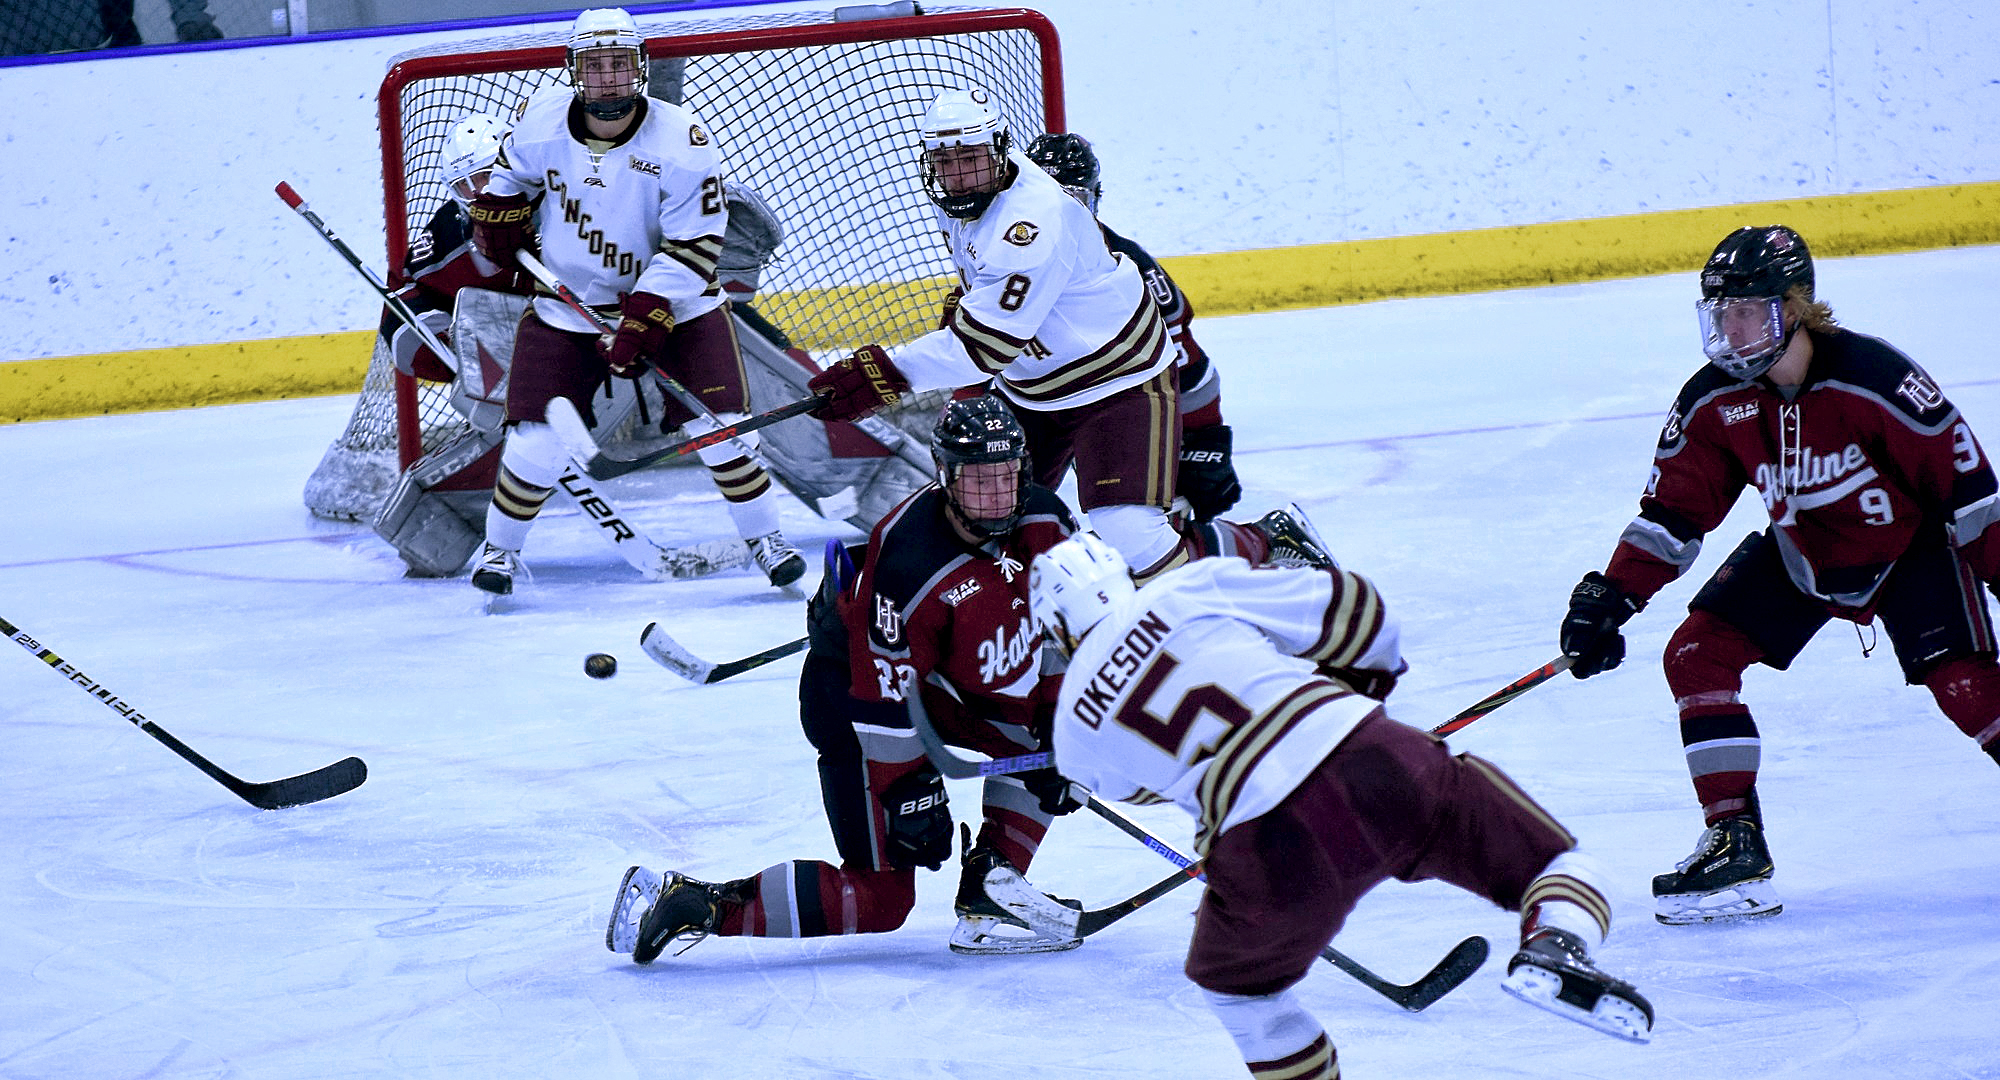 Senior Tanner Okeson fires one of his game-high six shots on goal in the second period of the Cobbers' win over Hamline. Teammates Aaron Herdt (#8) and Quinn Fuchs wait in front of the Piper goal.